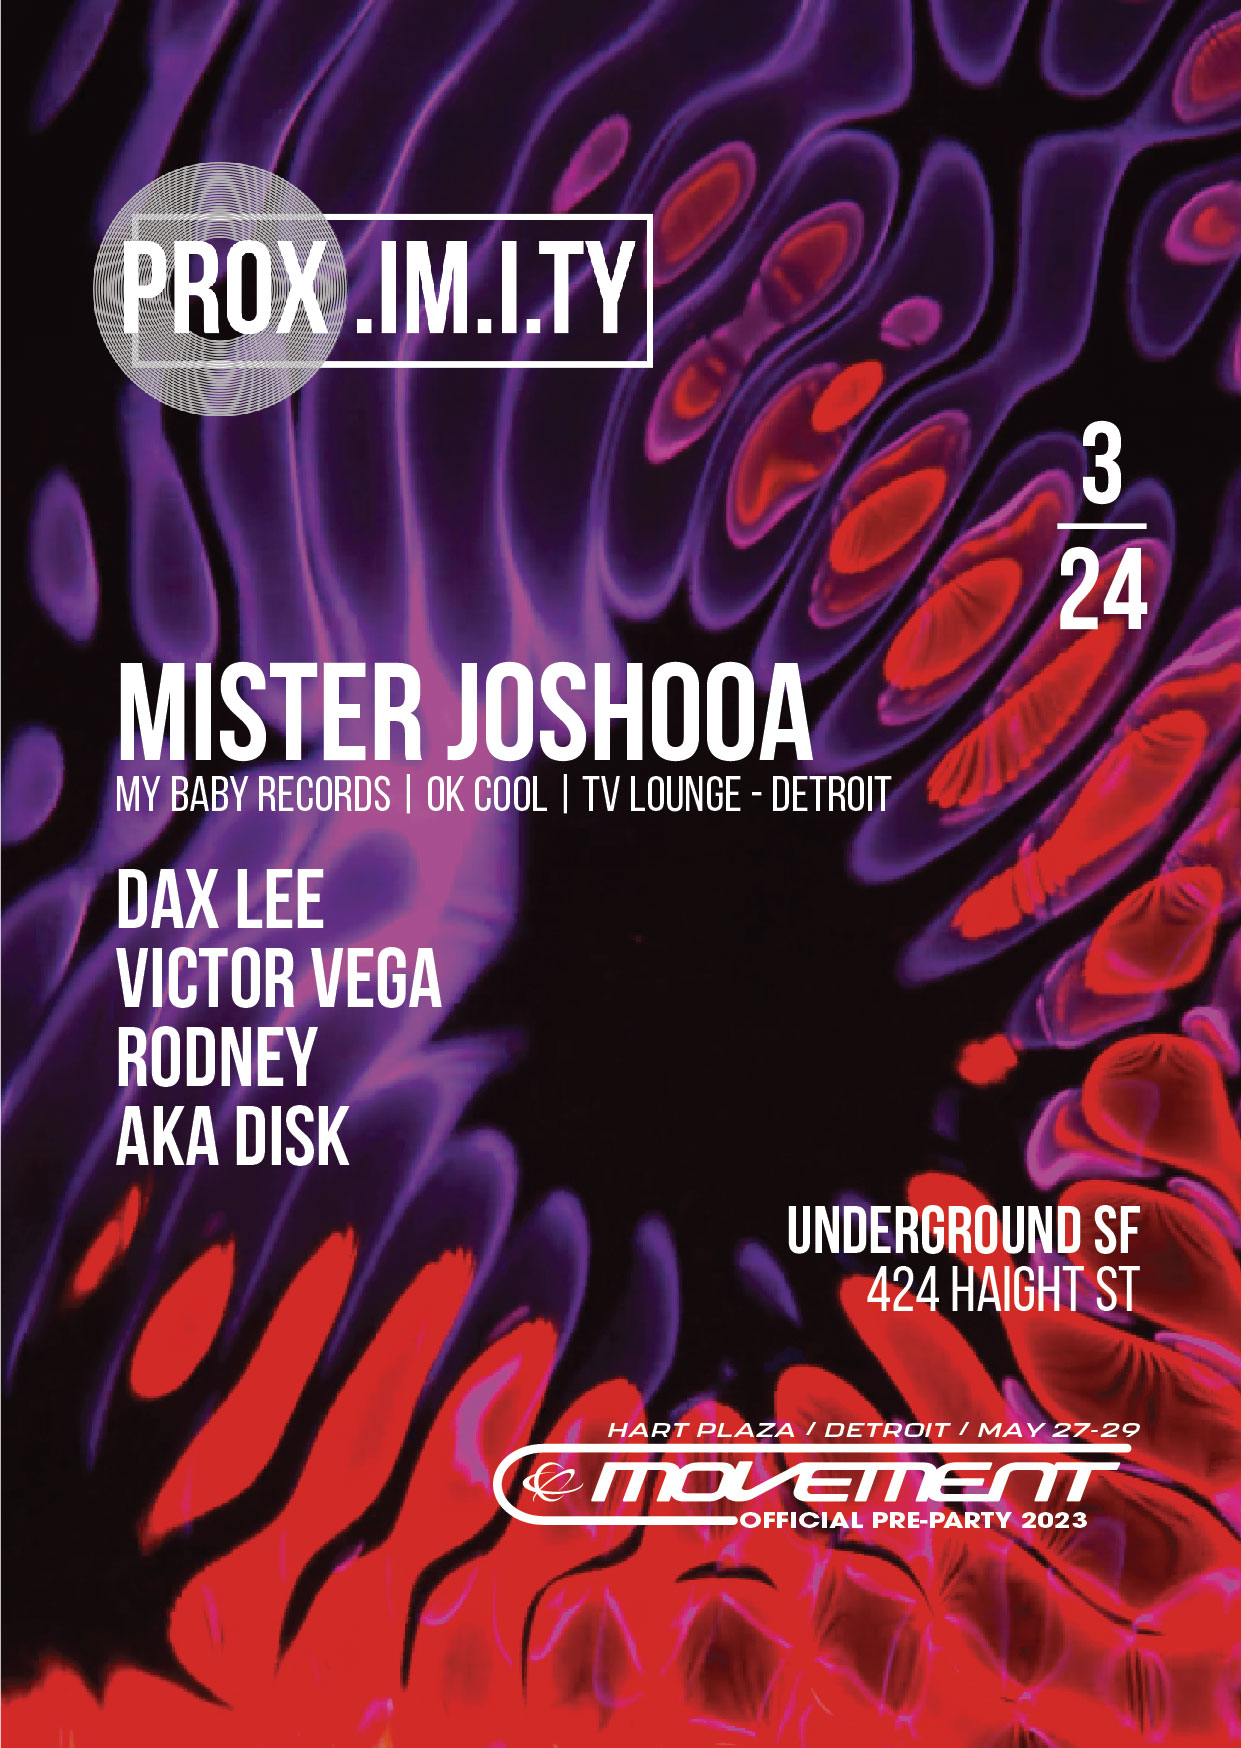 Movement Official Pre-Party w/ Mister Joshooa at Underground SF, San  Francisco/Oakland